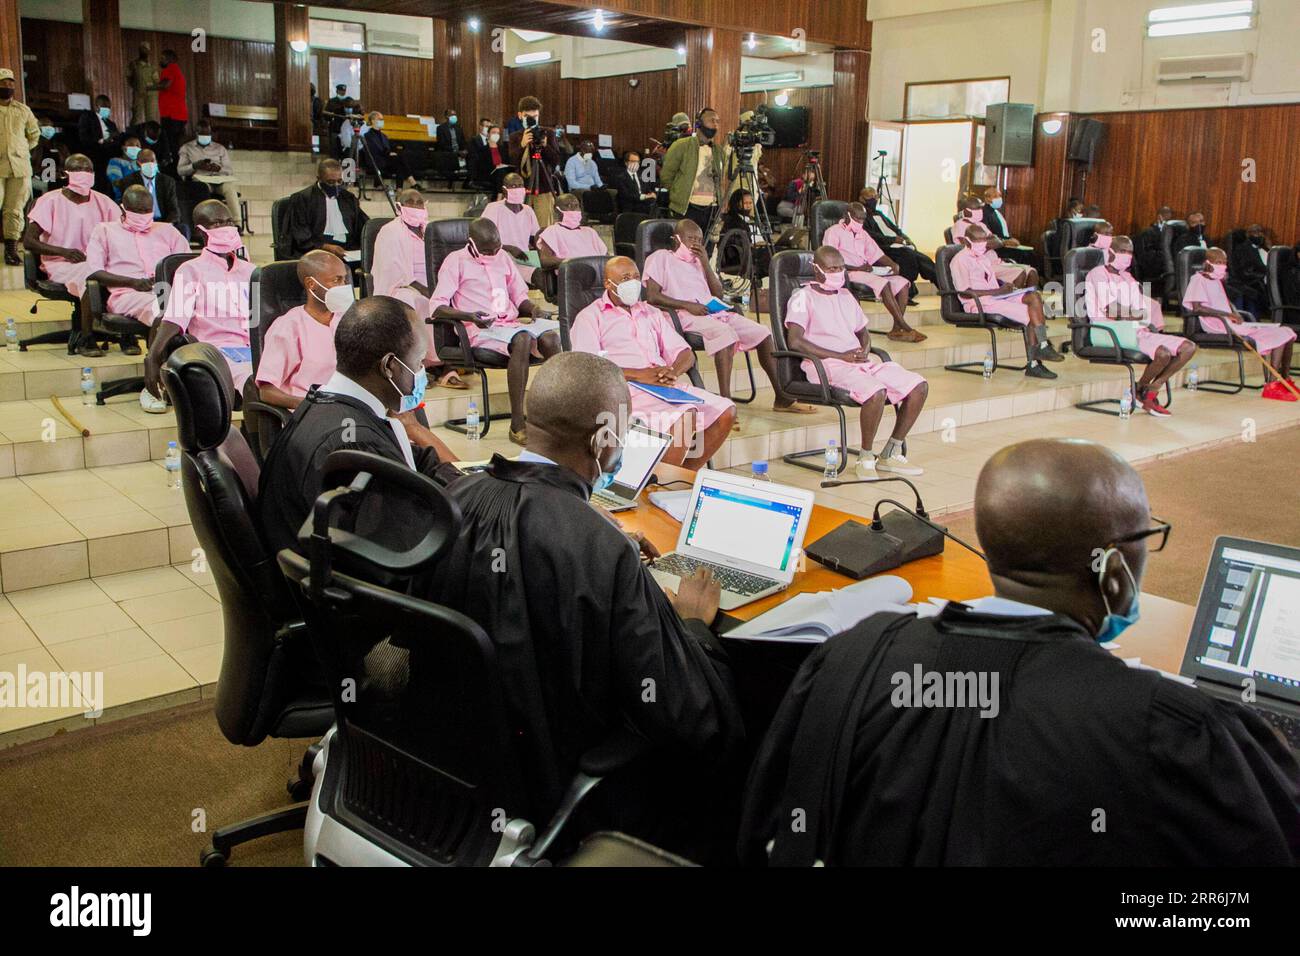 210218 -- KIGALI, Feb. 18, 2021 -- Paul Rusesabagina and other co-accused wait in a courtroom in Kigali, Rwanda, on Feb. 17, 2021. Rwanda s high court on Wednesday started trial against Paul Rusesabagina, portrayed as a humanitarian activist in the controversial Oscar-nominated film Hotel Rwanda, for 13 charges including terrorism, financing terrorism and forming armed groups. Photo by /Xinhua RWANDA-KIGALI-PAUL RUSESABAGINA-TRIAL CyrilxNdegeya PUBLICATIONxNOTxINxCHN Stock Photo